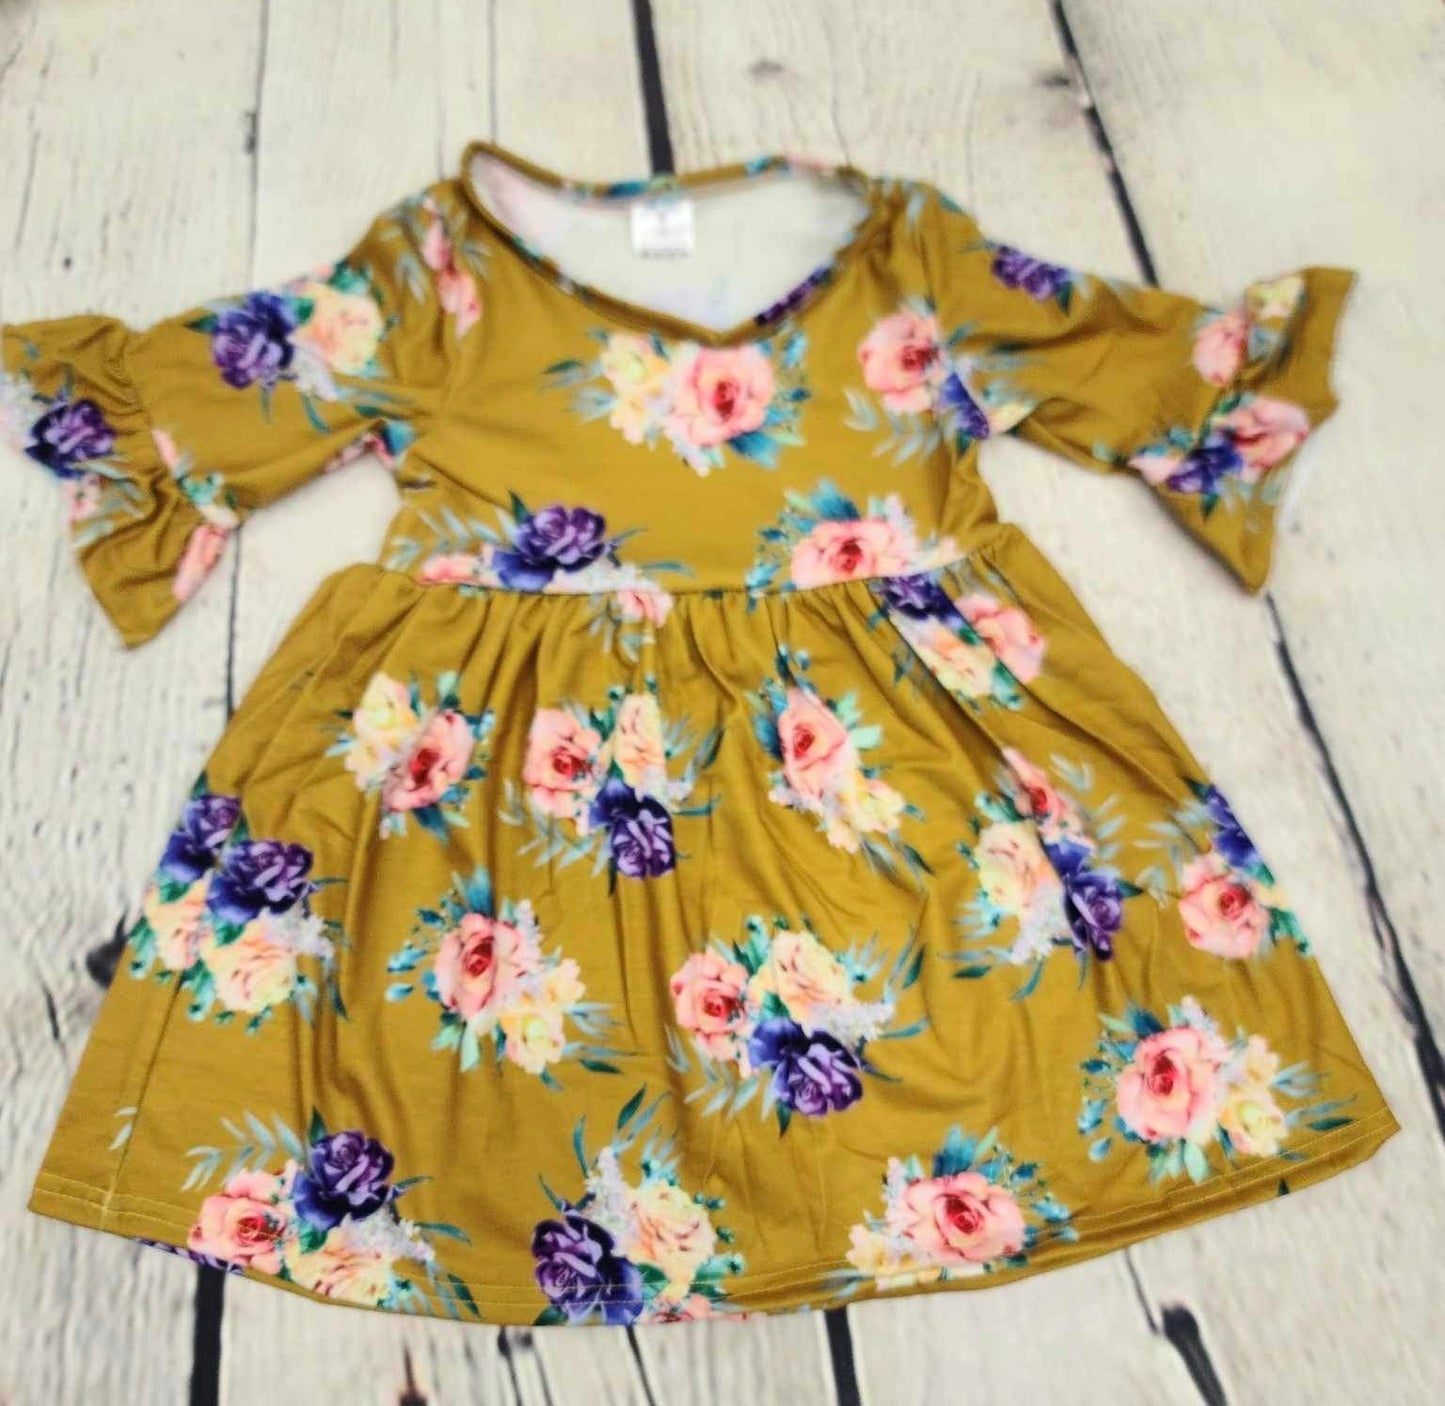 Bunches of flowers dress